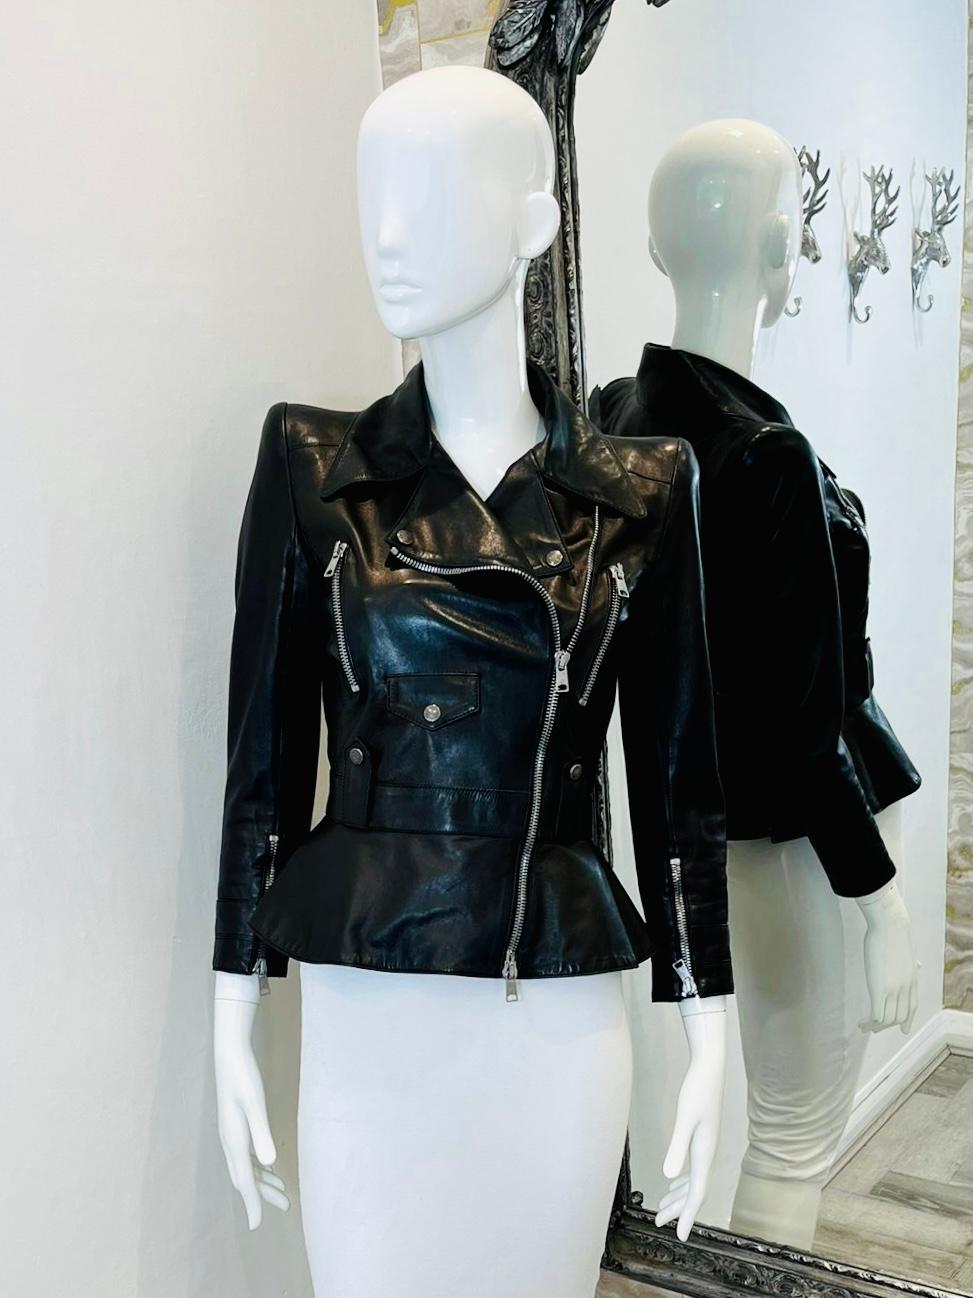 Alexander McQueen Leather Biker Jacket

Black fitted style jacket with cinched waist. Asymmetric zipper closure. cuffs '

and pockets. 

Size - 40IT

Condition - Very Good/Excellent

Composition - Leather